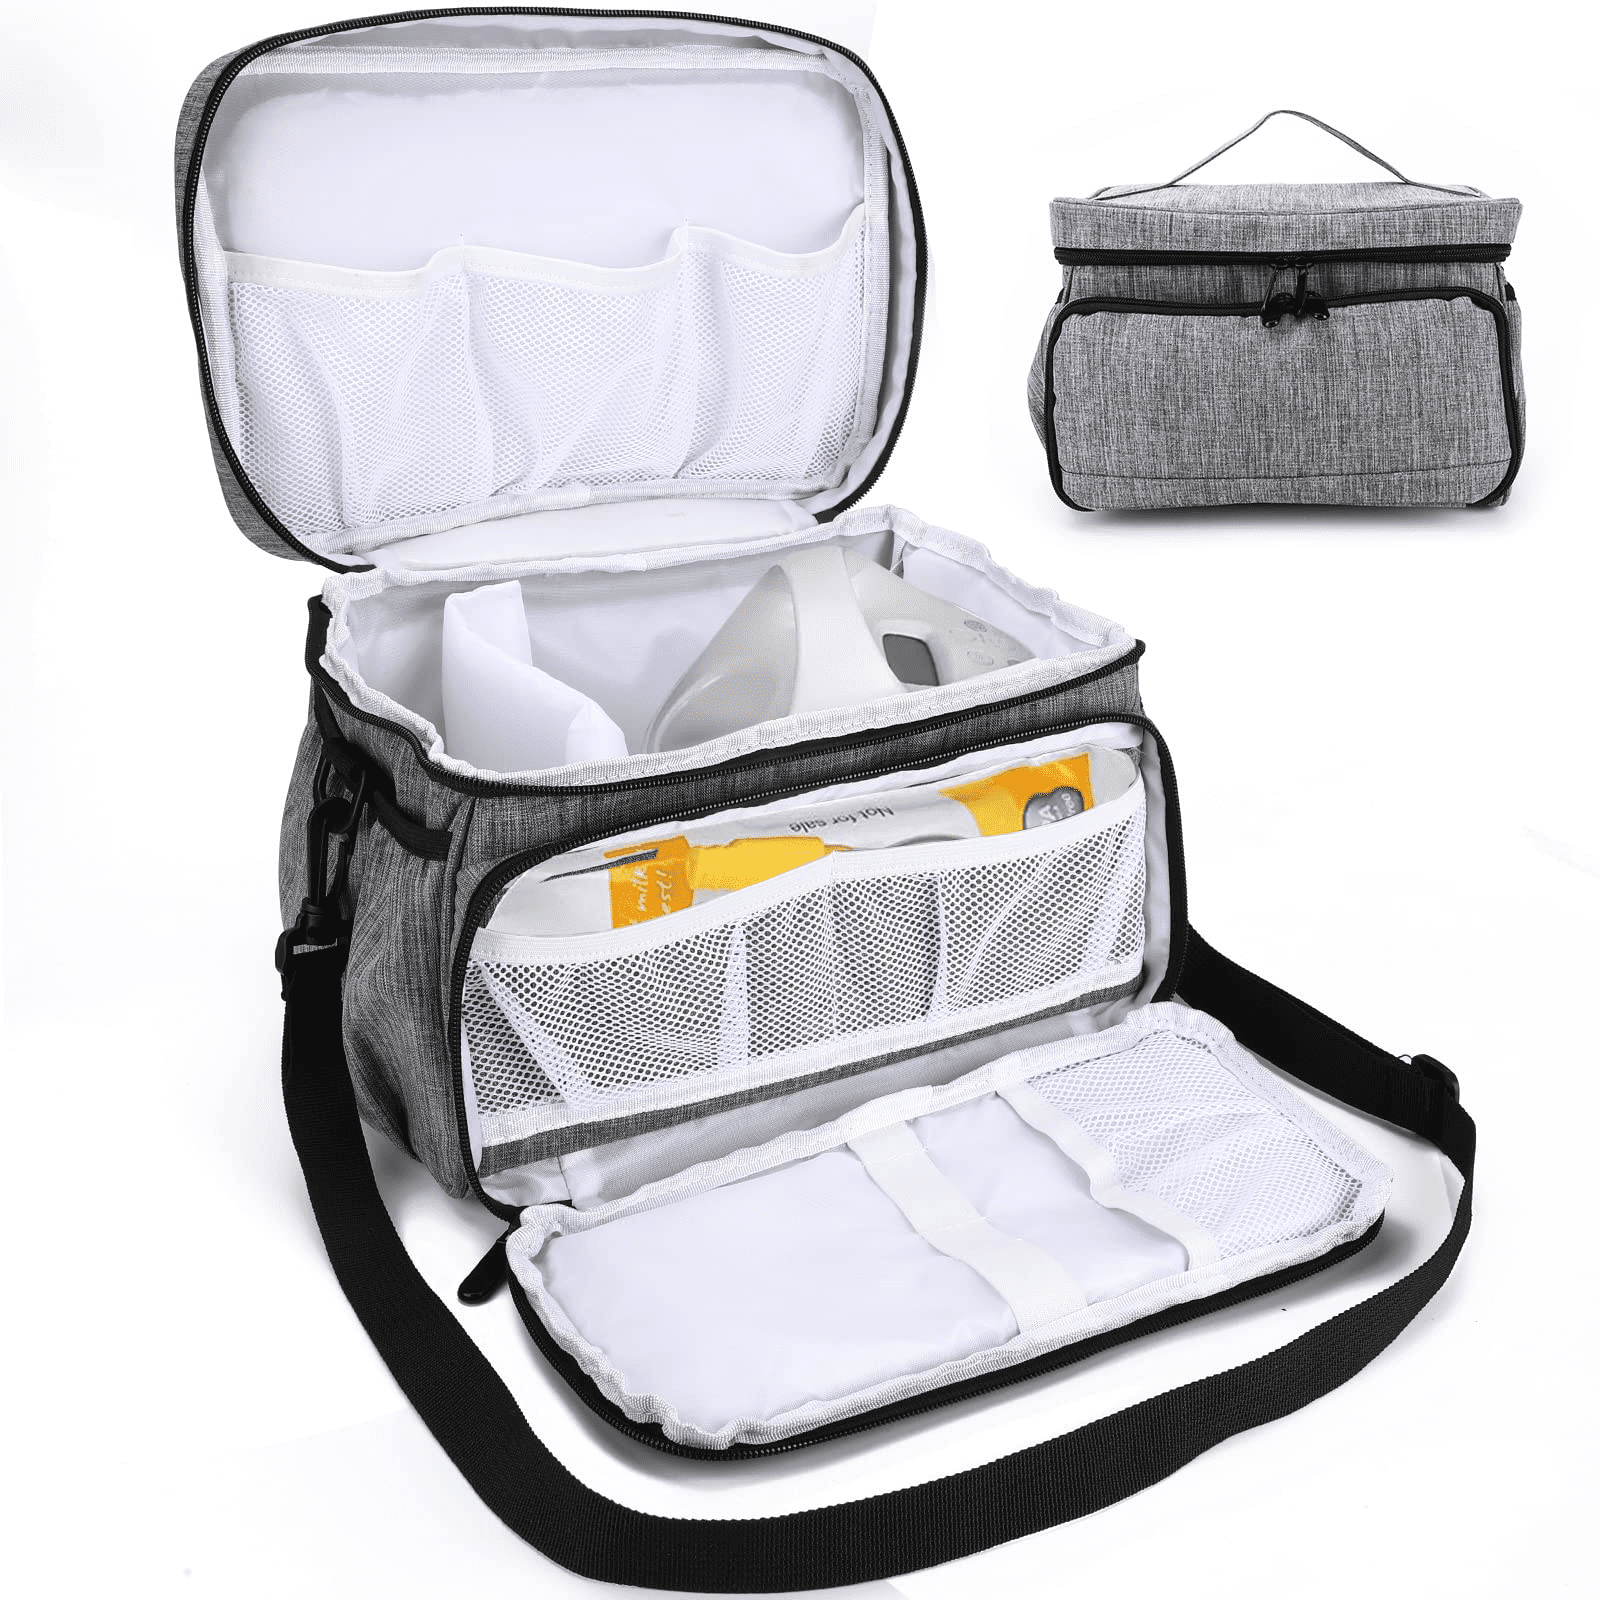 Wearable Breast Pump Bag Fits Breast Pumps Like Momcozy, Medela, Lansinoh,  Elvie, Willow, 2 Layers Portable Breast Pump Travel Bag for Working Moms  and Extra Parts, Bag Only (Grey)\u2026 